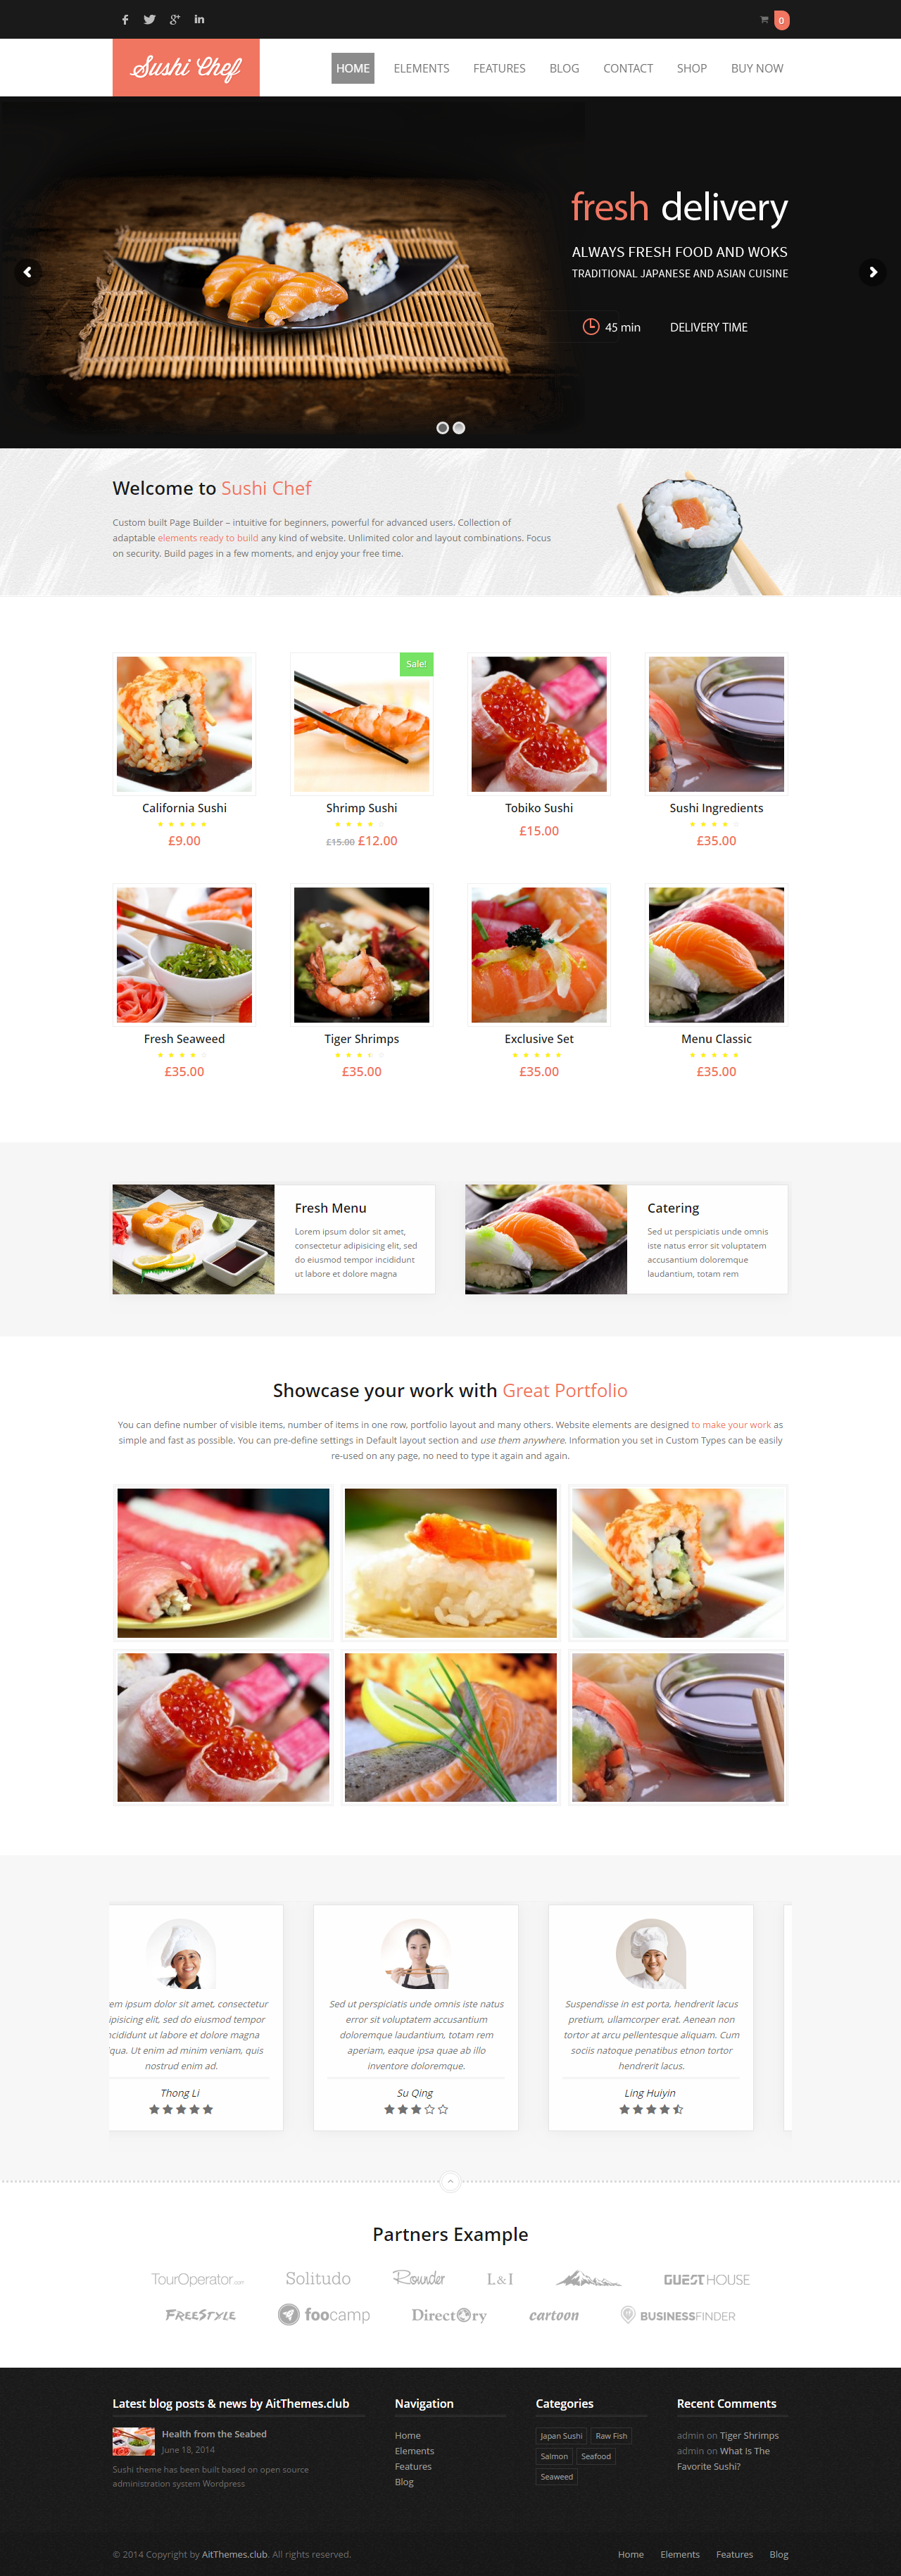 web design services in pune - Food Delivery WordPress Theme 2 - Web Design Services in Pune